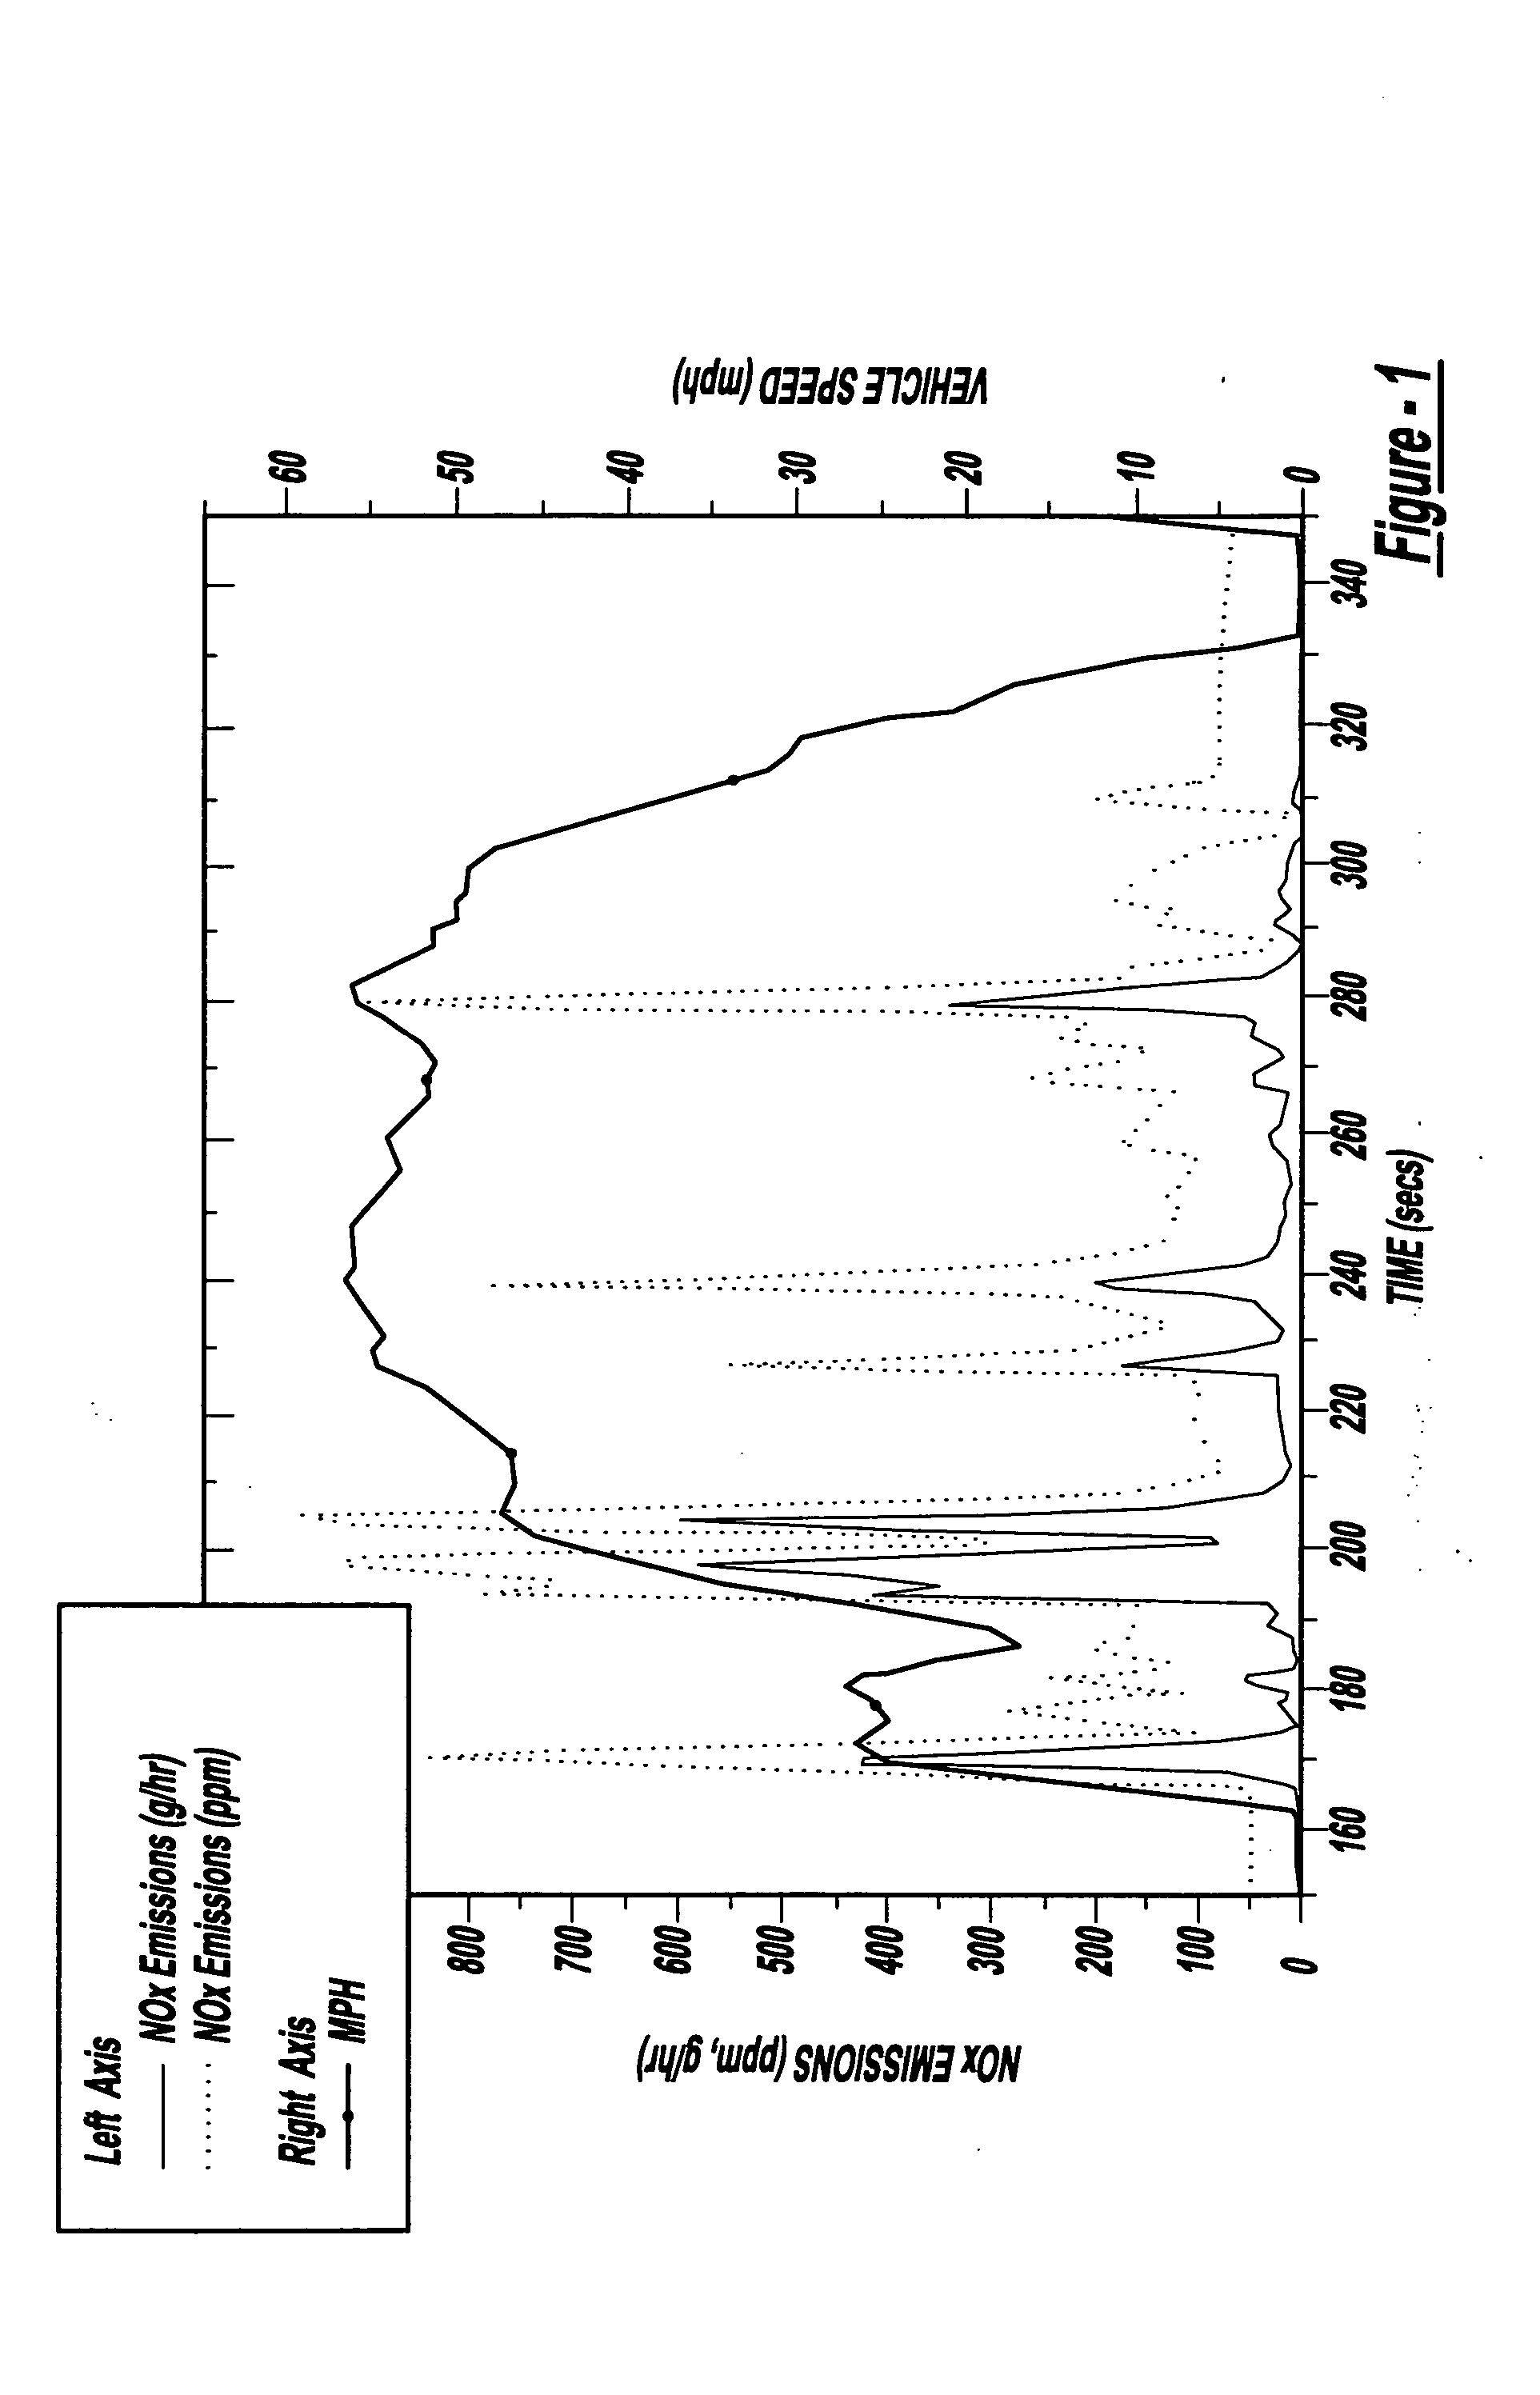 System and method for reducing NOx emissions during transient conditions in a diesel fueled vehicle with EGR